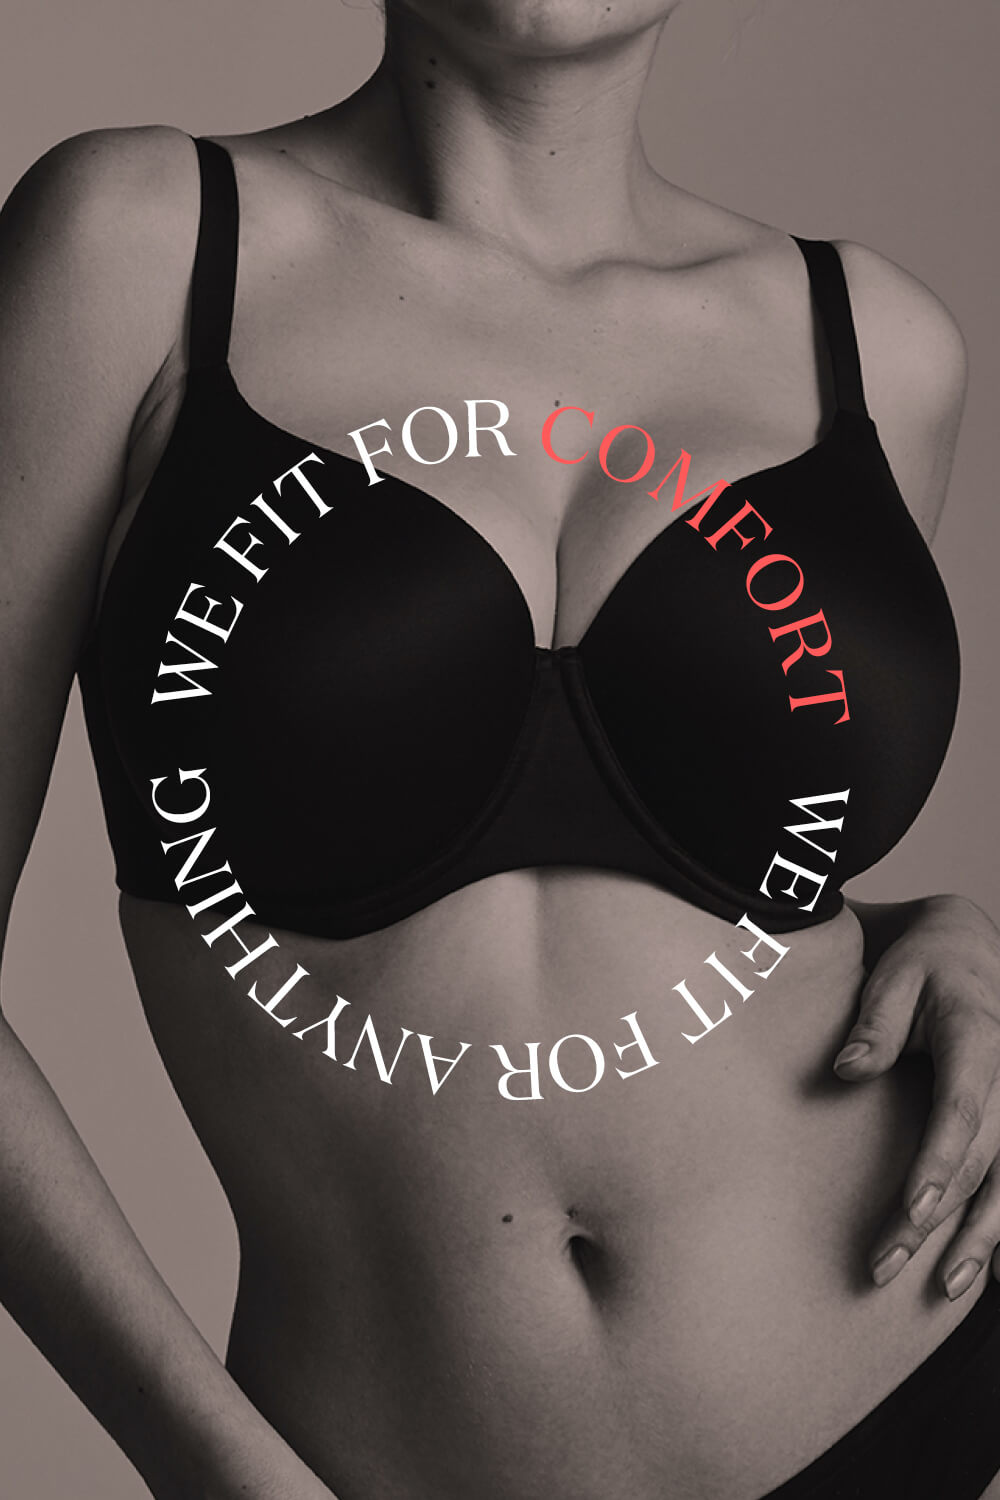 Bras N Things celebrate the female form with launch of new 'We Fit